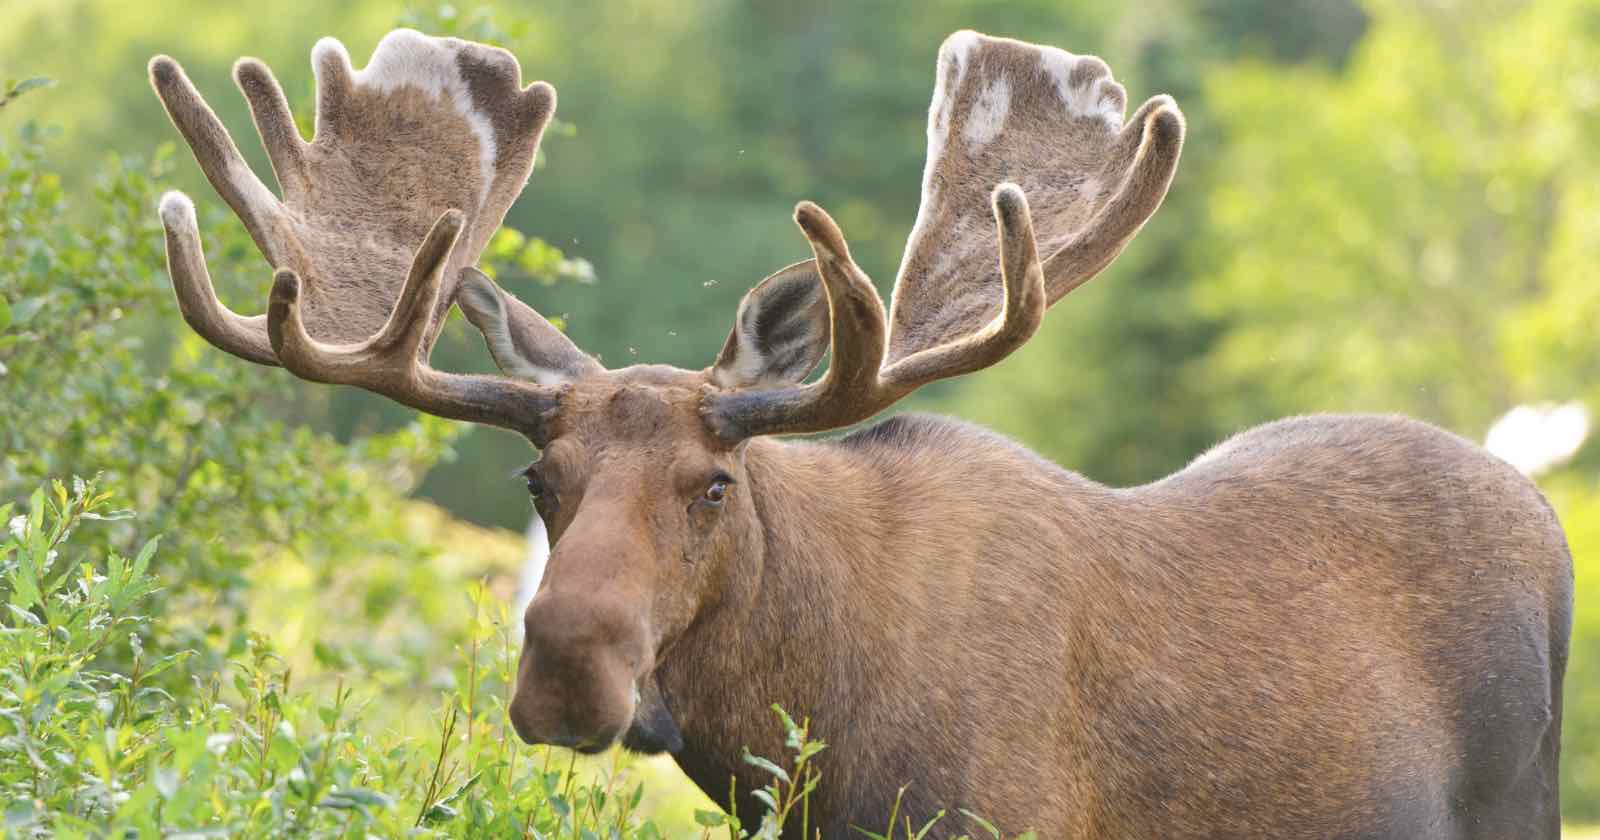  photographer kicked death moose after trying take pictures 